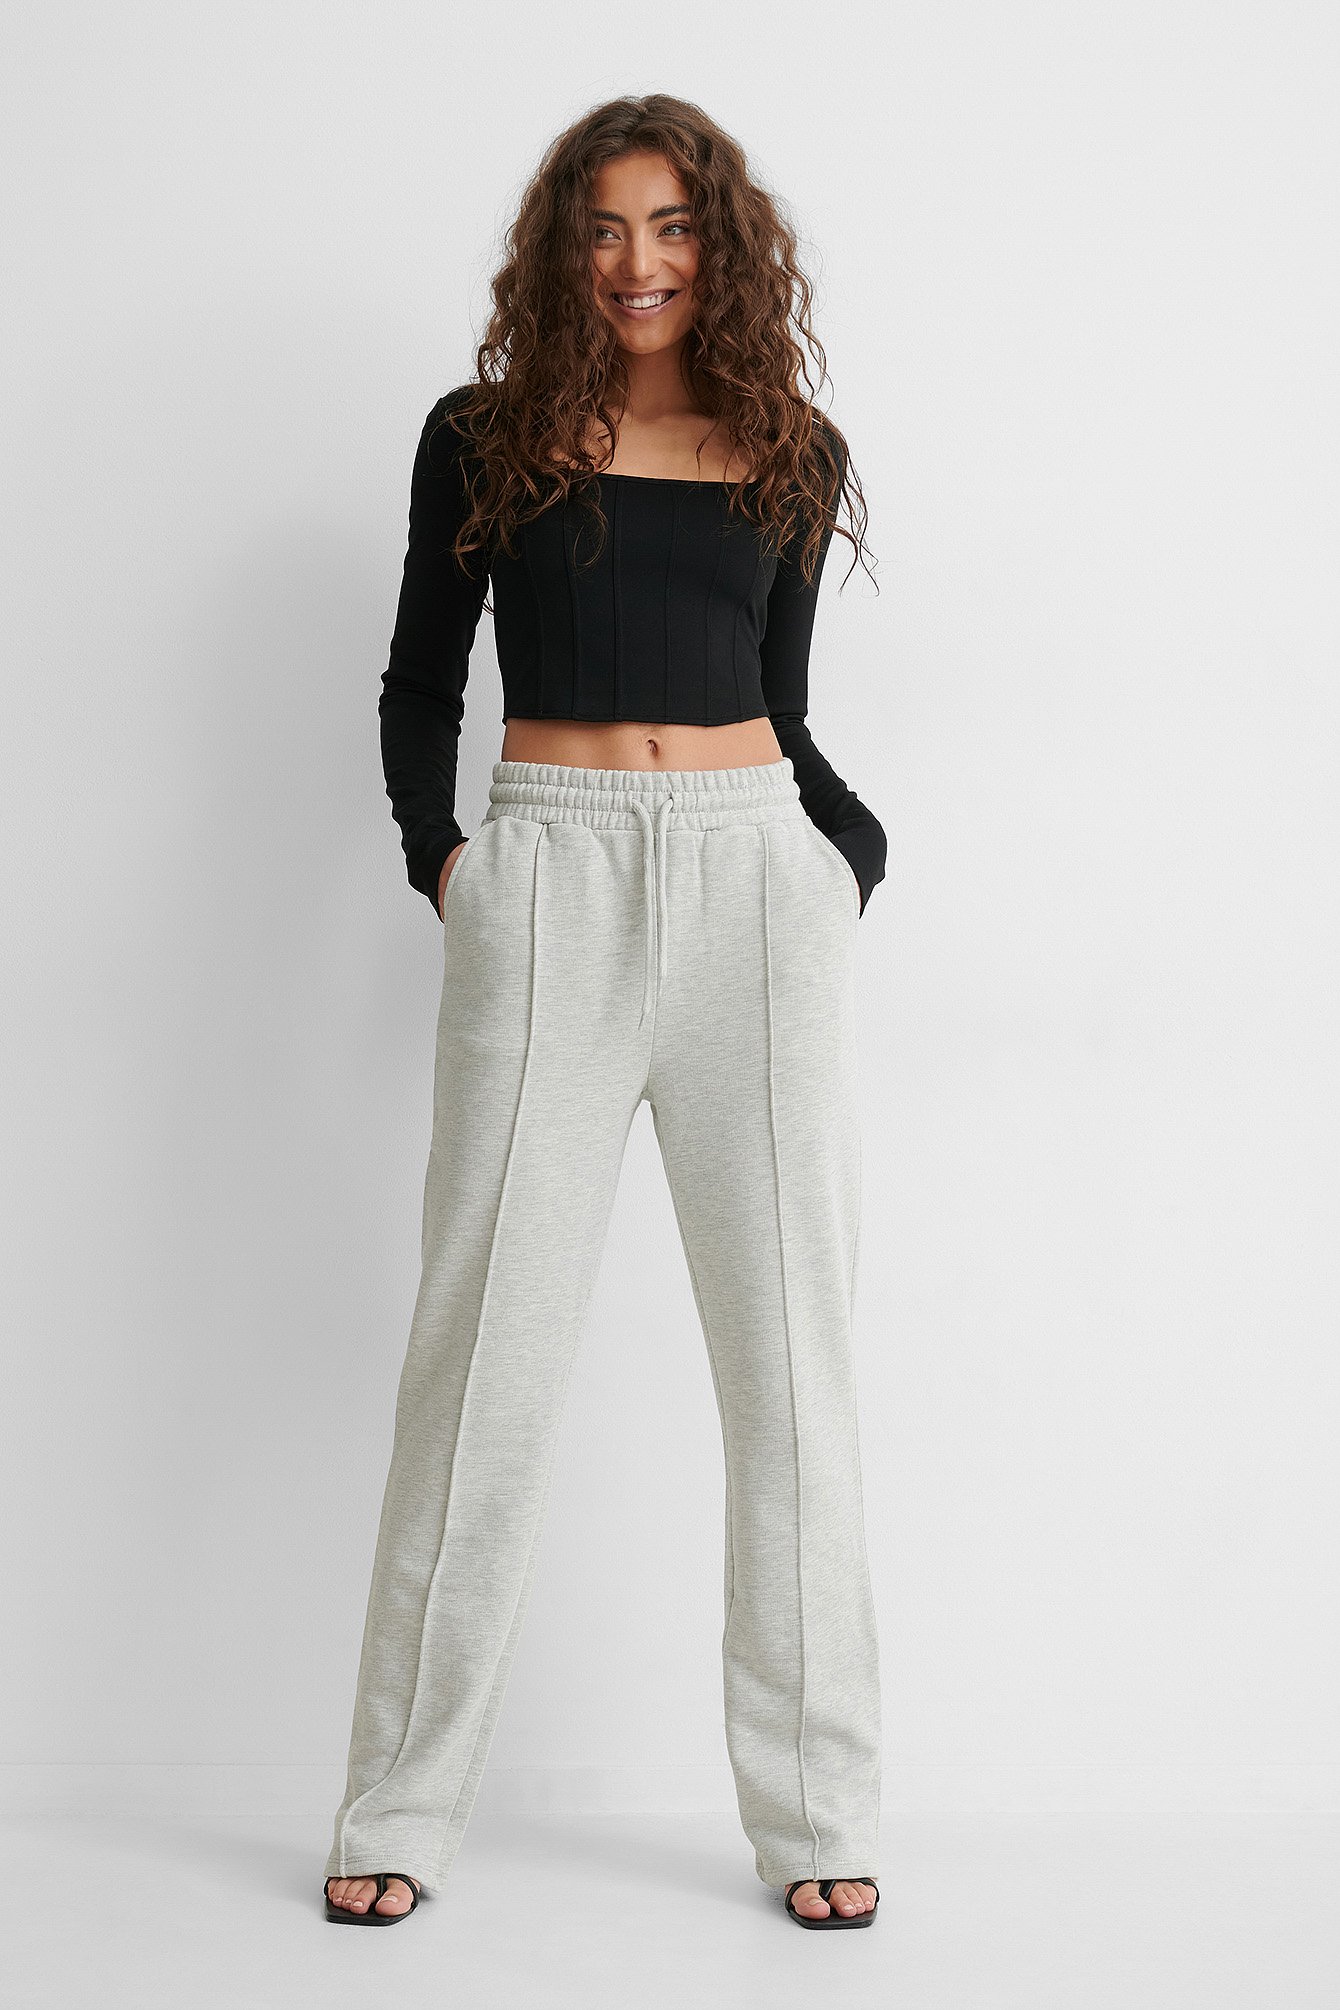 Straight Sweatpants Outfit!